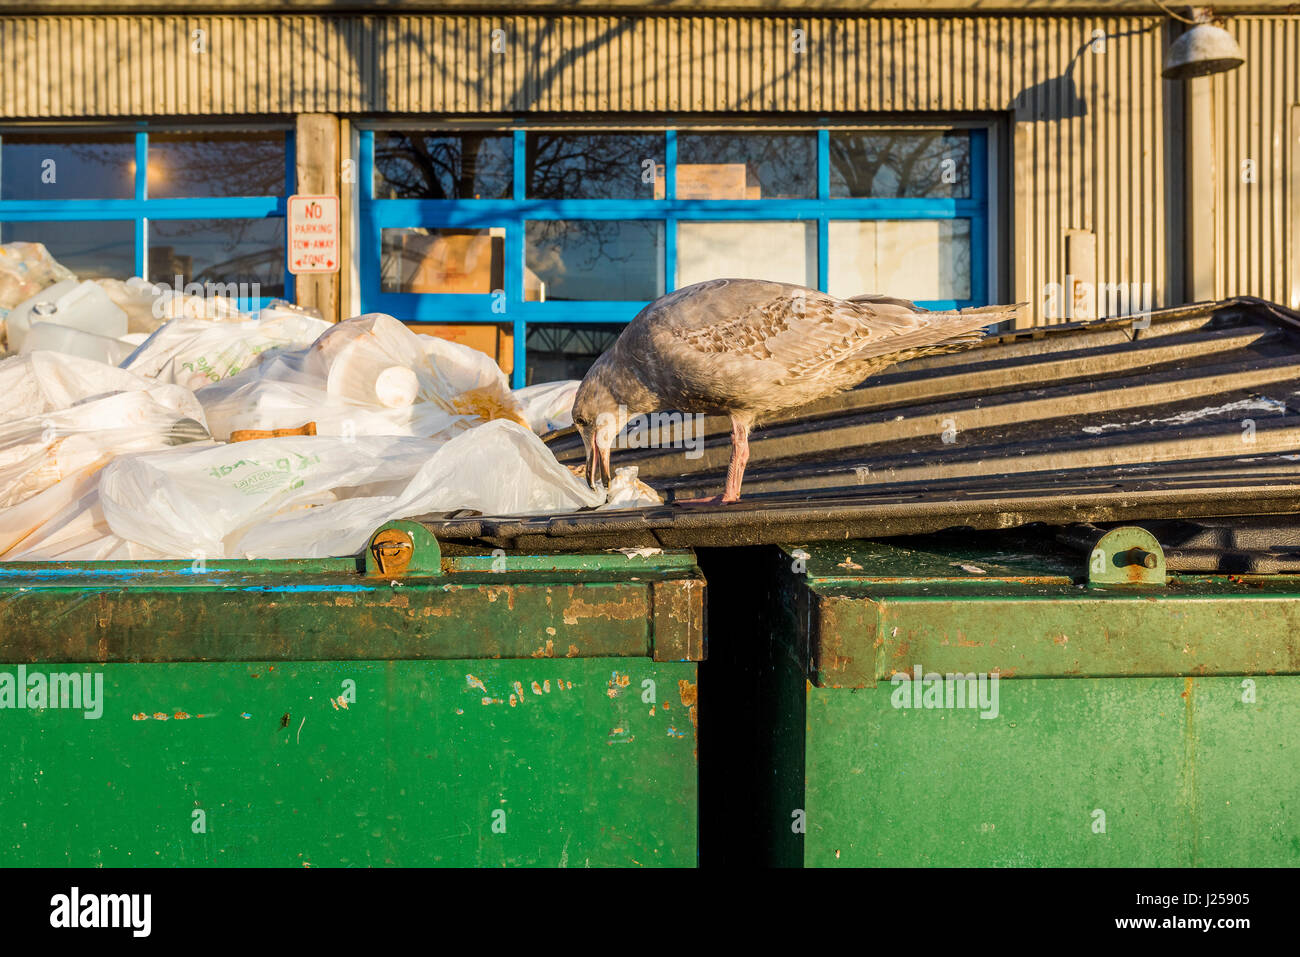 Gull scavenging in garbage dumpster. Stock Photo